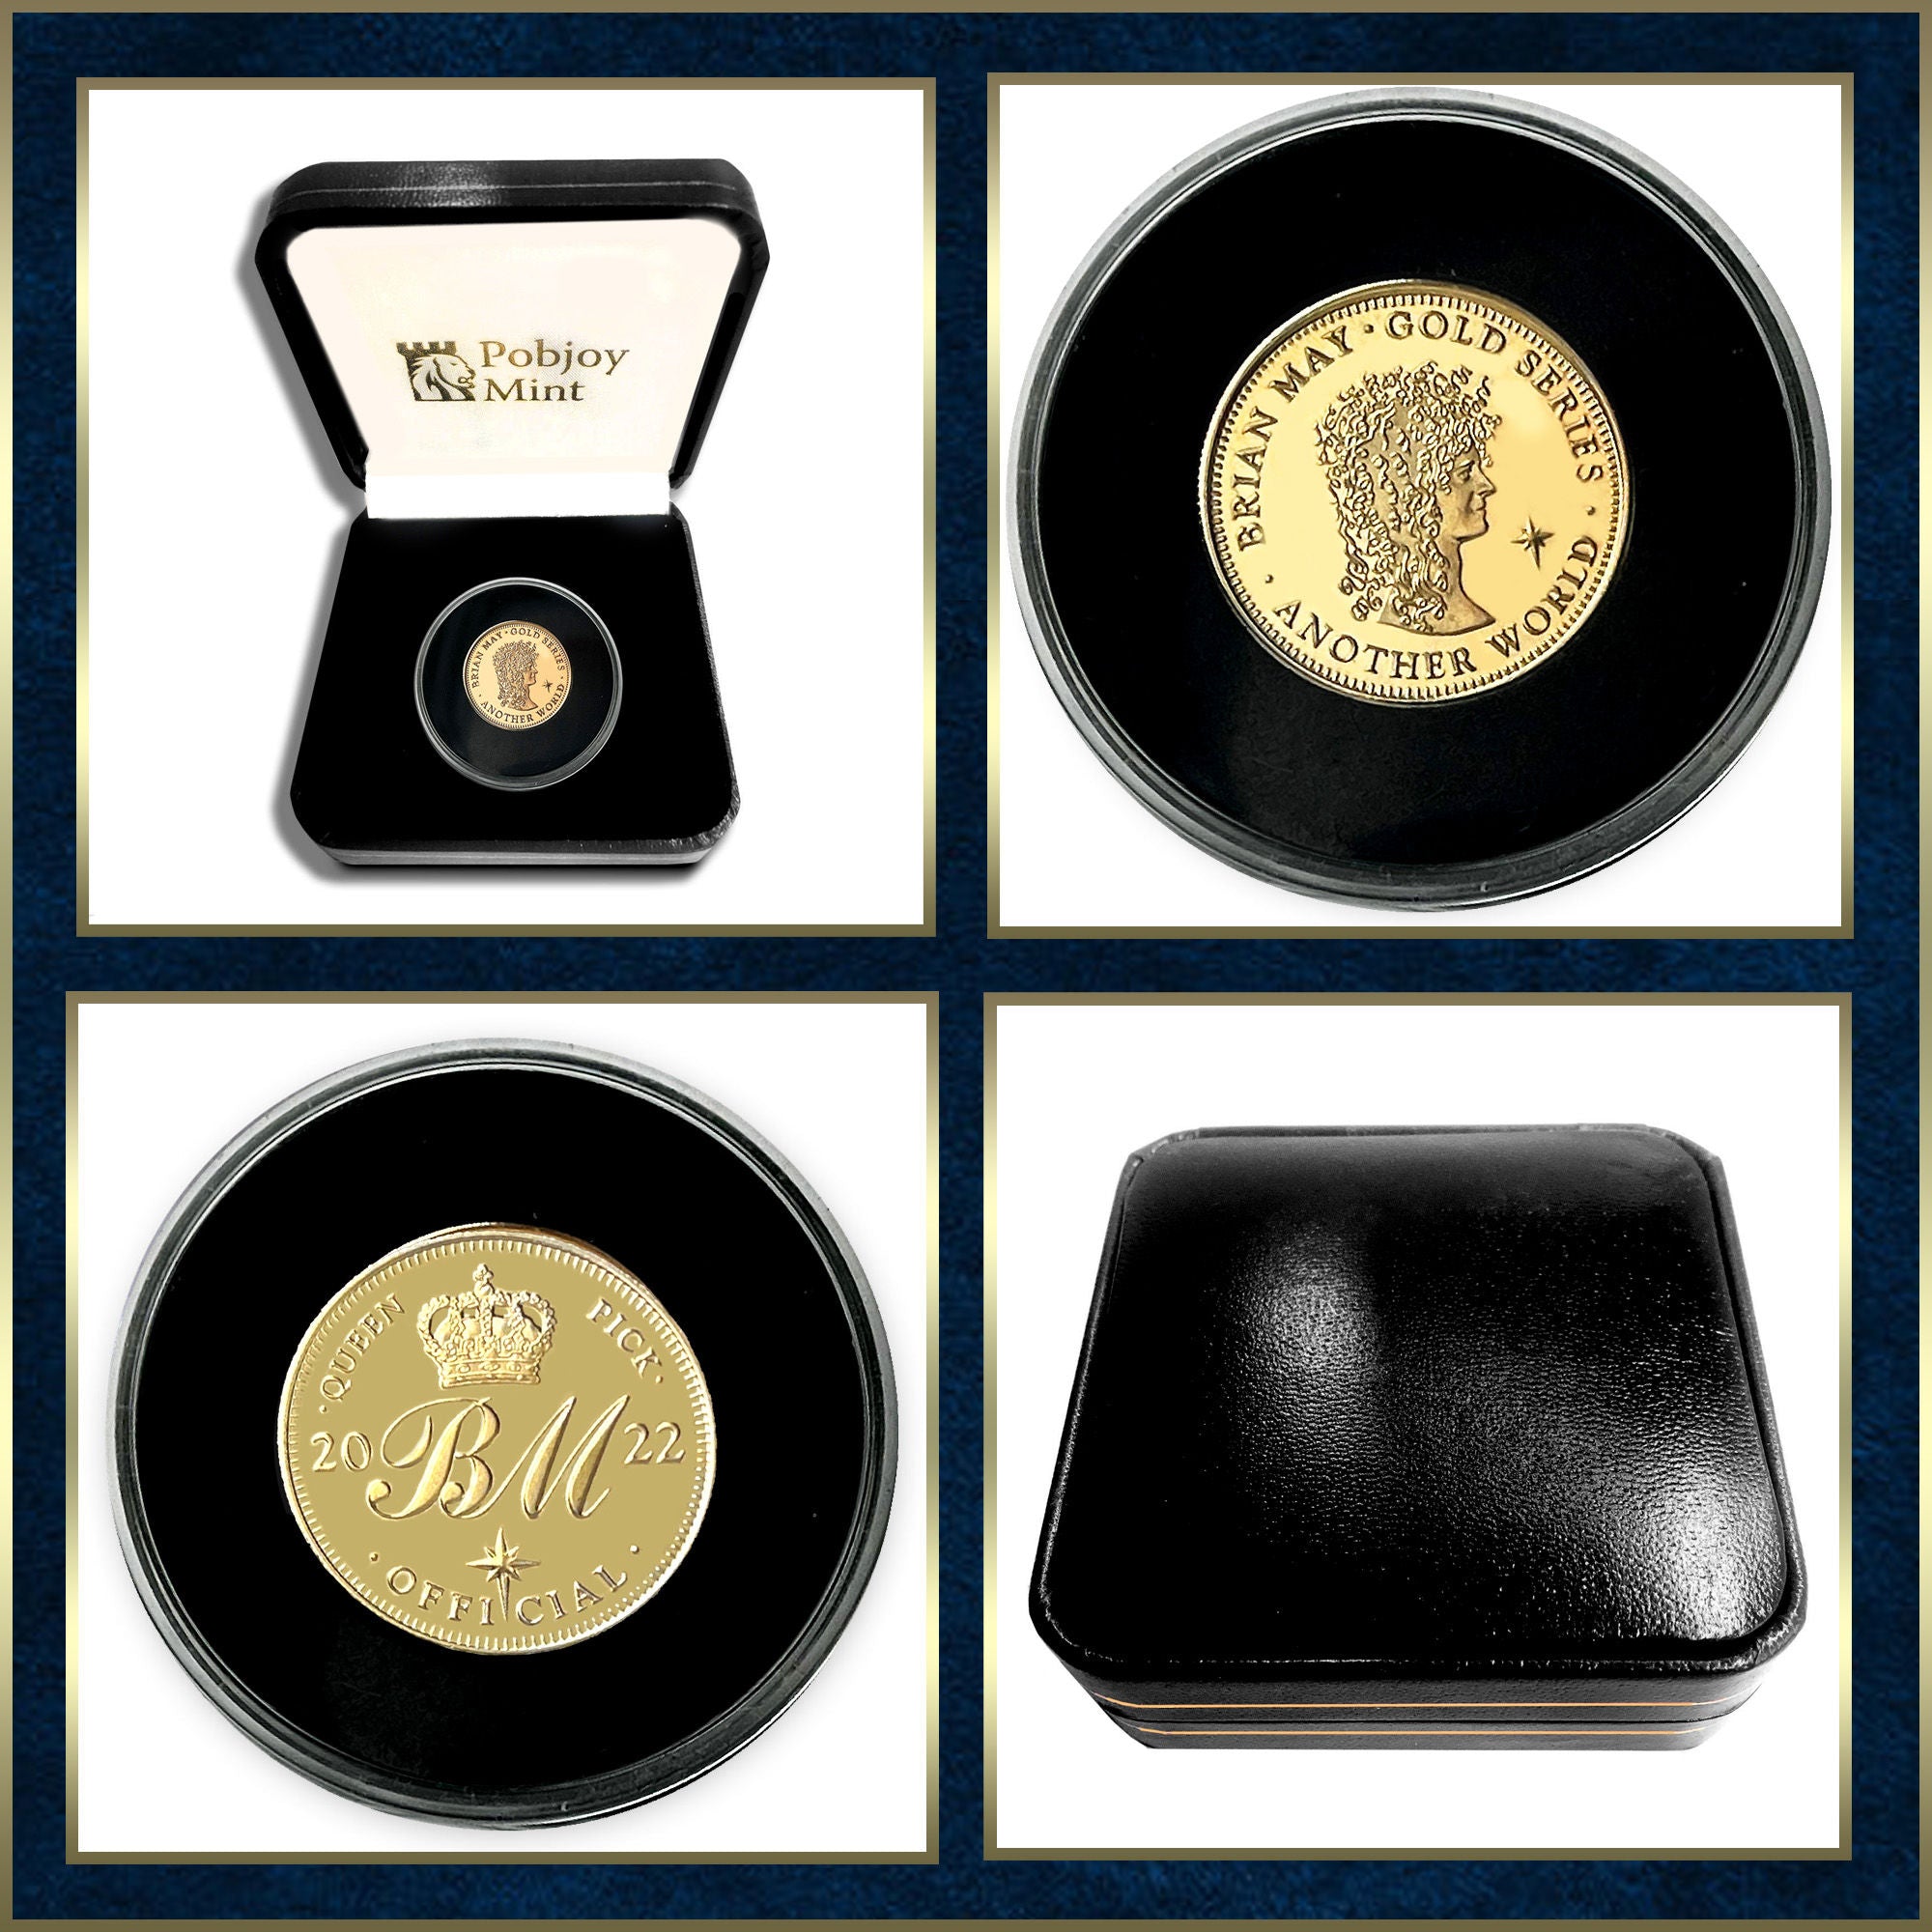 Brian May - 2022 Limited Edition Gold "Another World" Sixpence